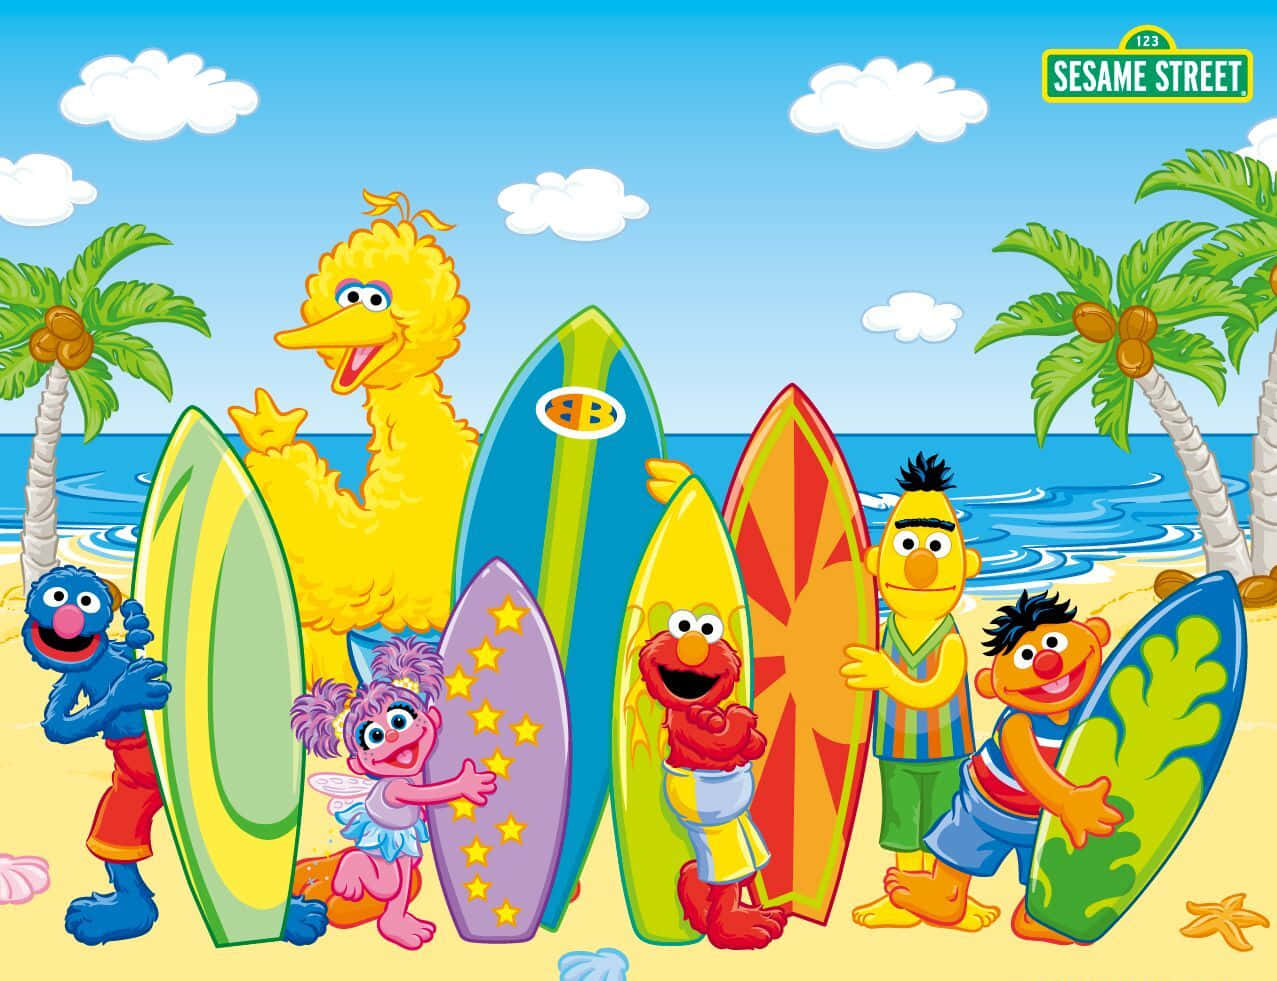 Get Ready for a Fun-Filled Day with Sesame Street